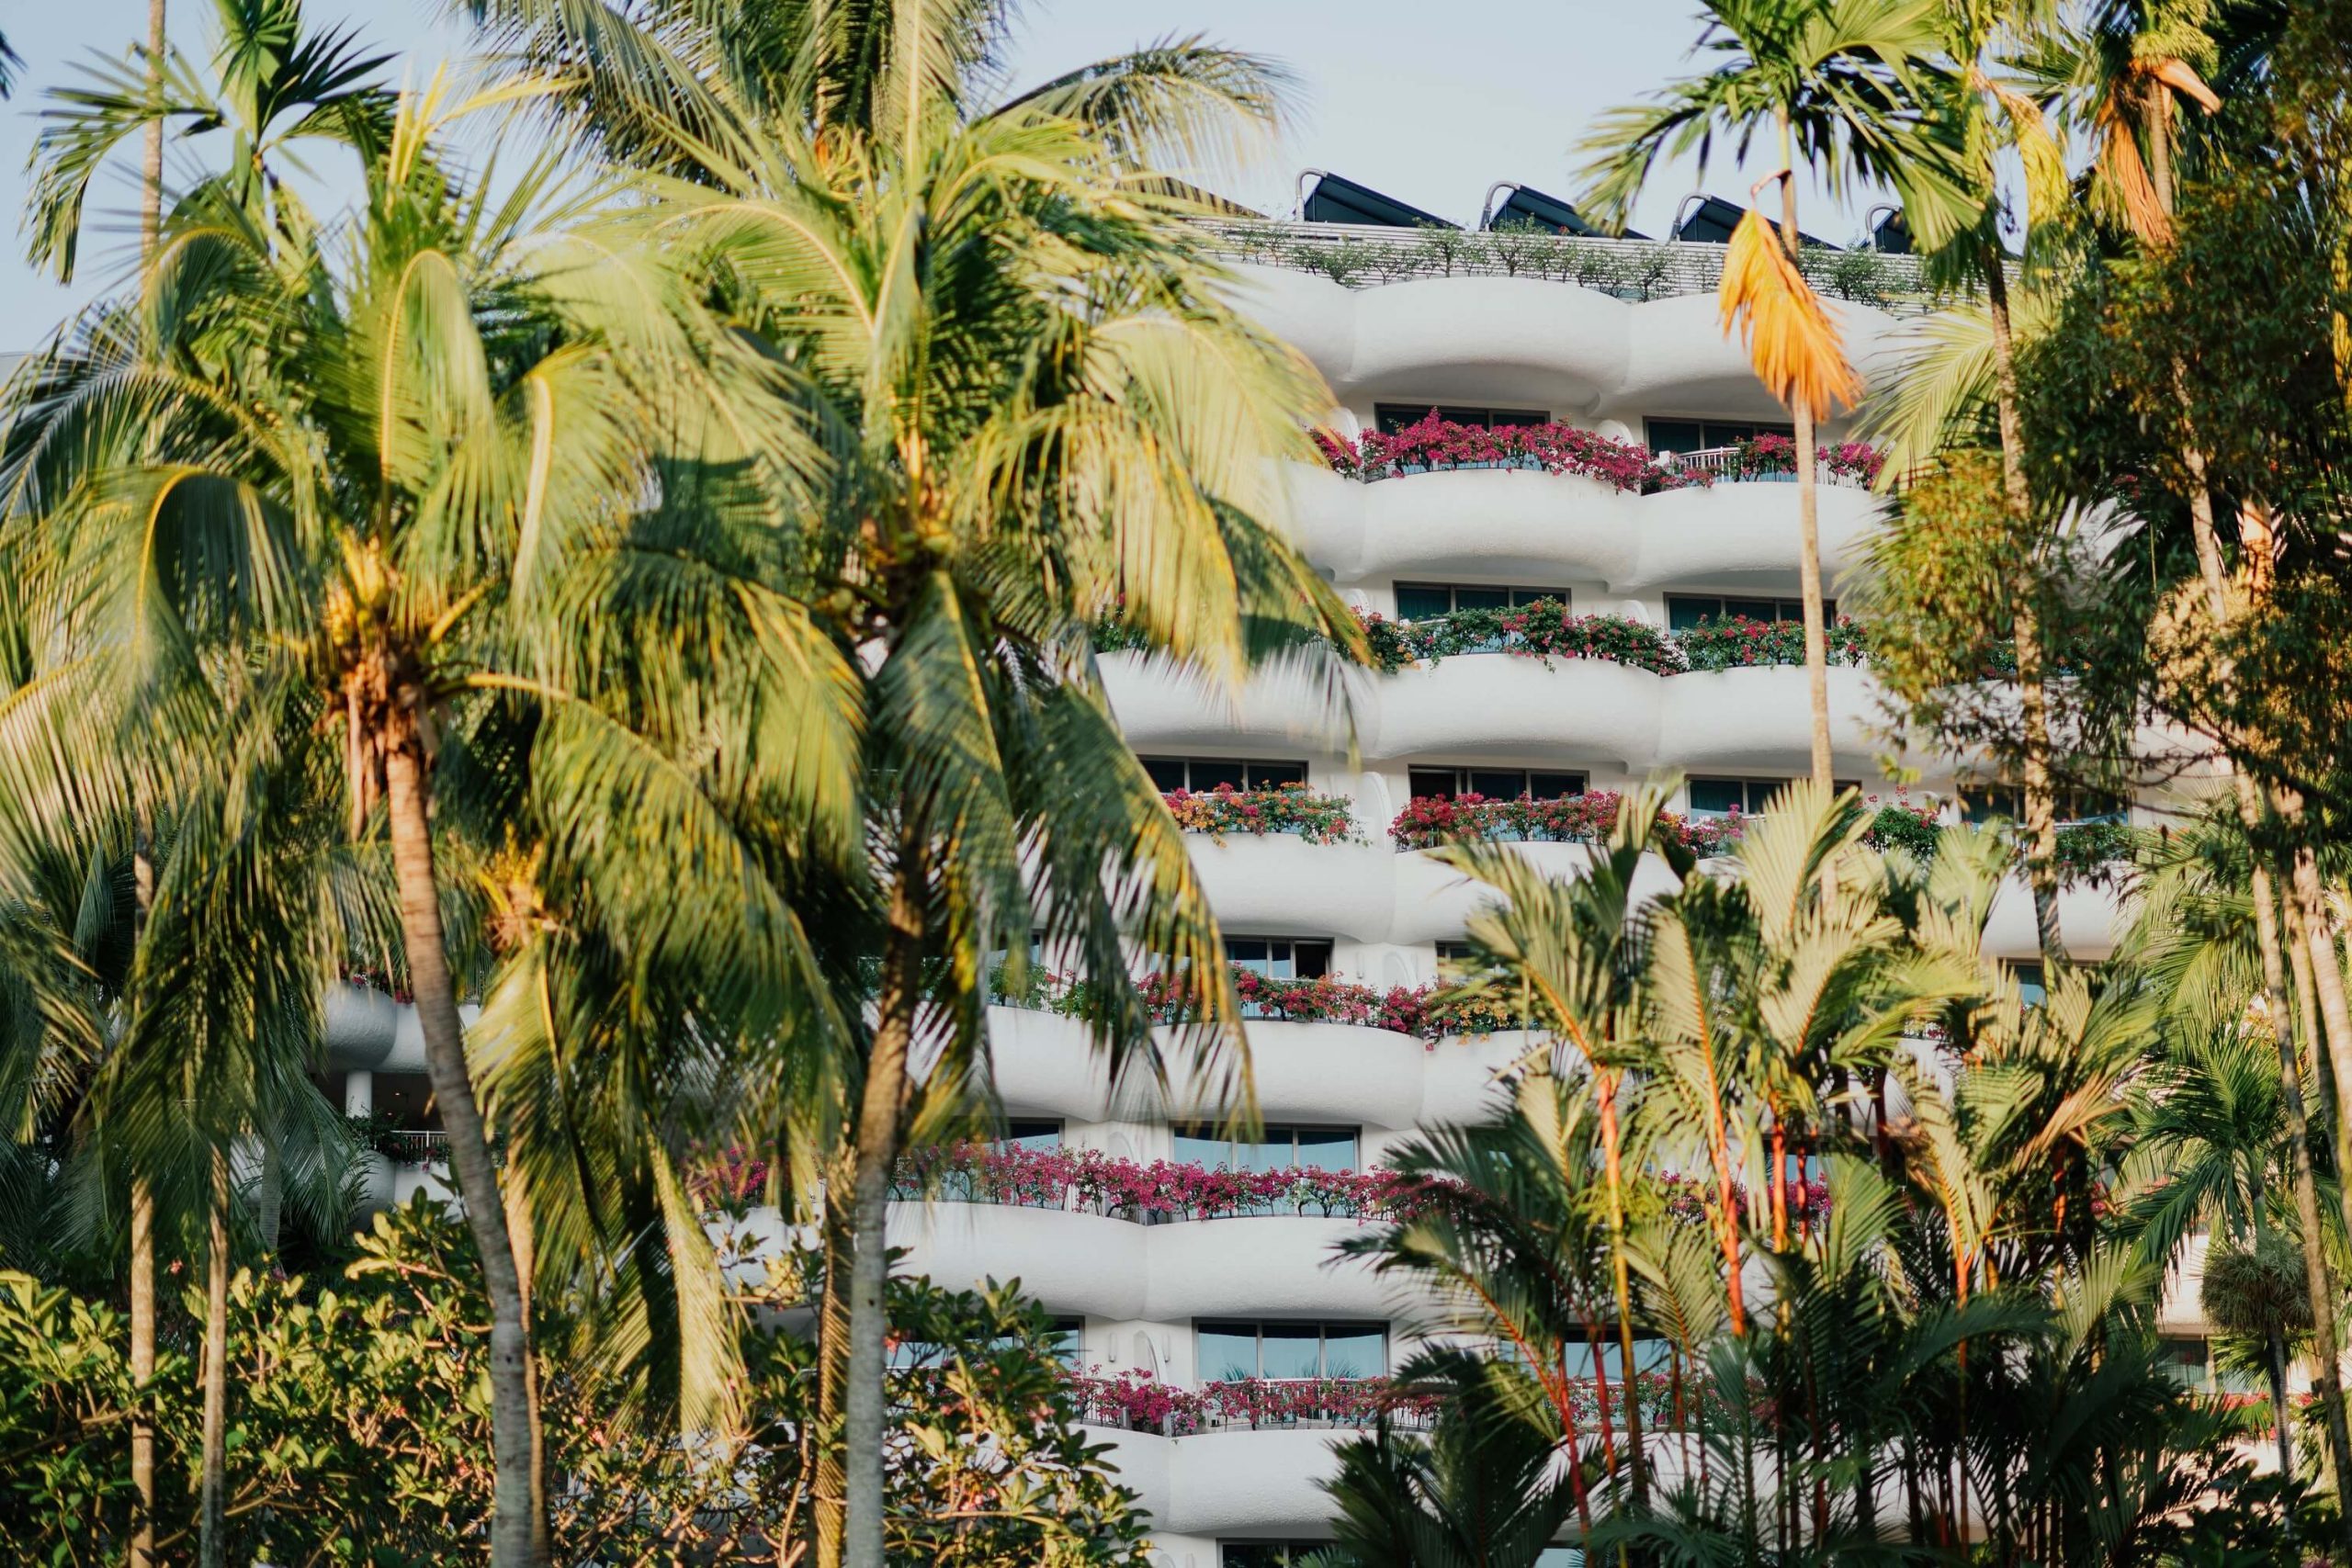 A photo of the front of a resort with palm trees